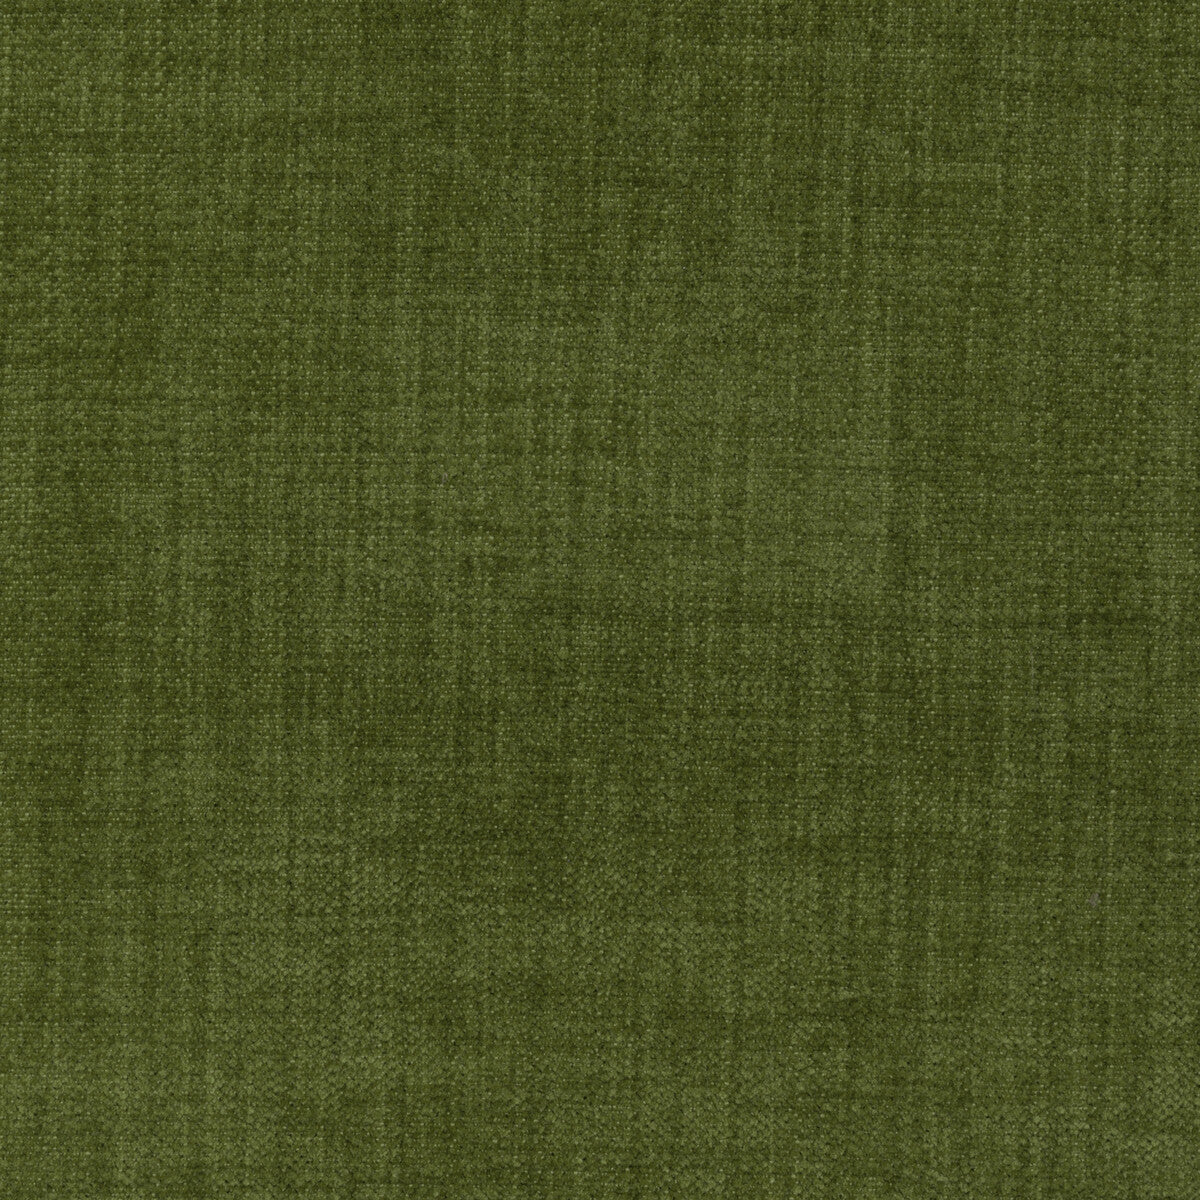 Accommodate fabric in moss color - pattern 36255.30.0 - by Kravet Contract in the Supreen collection